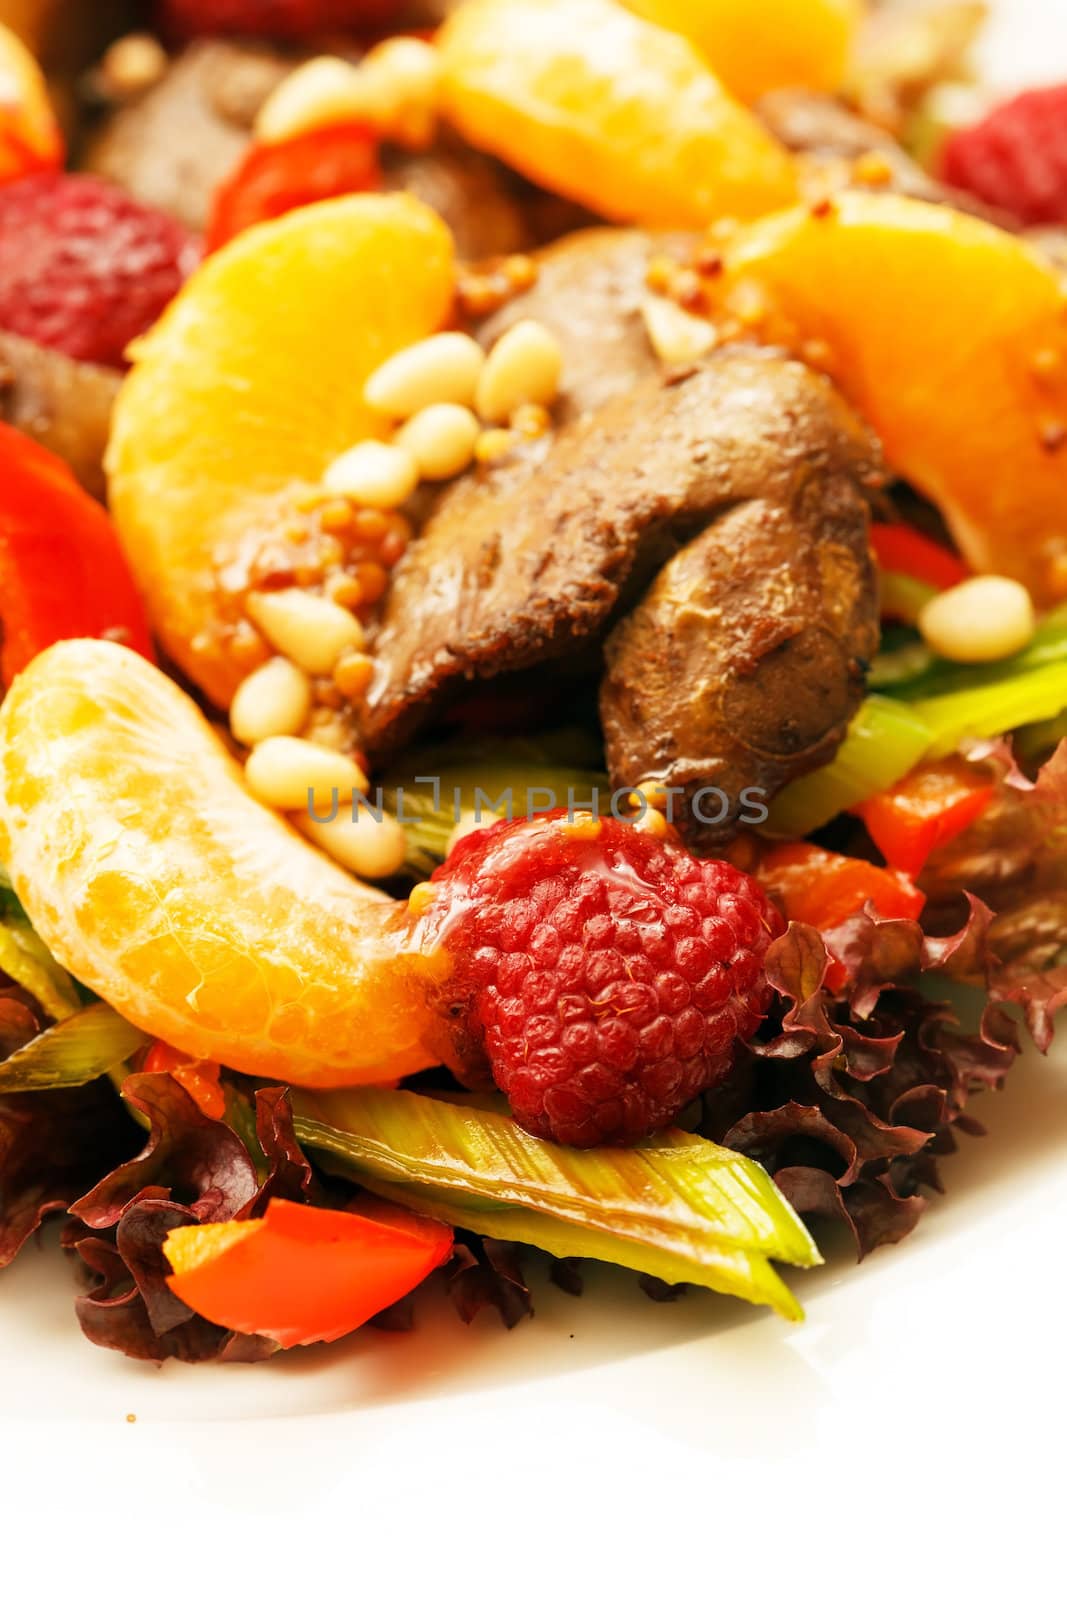 chicken liver with fruits by shebeko